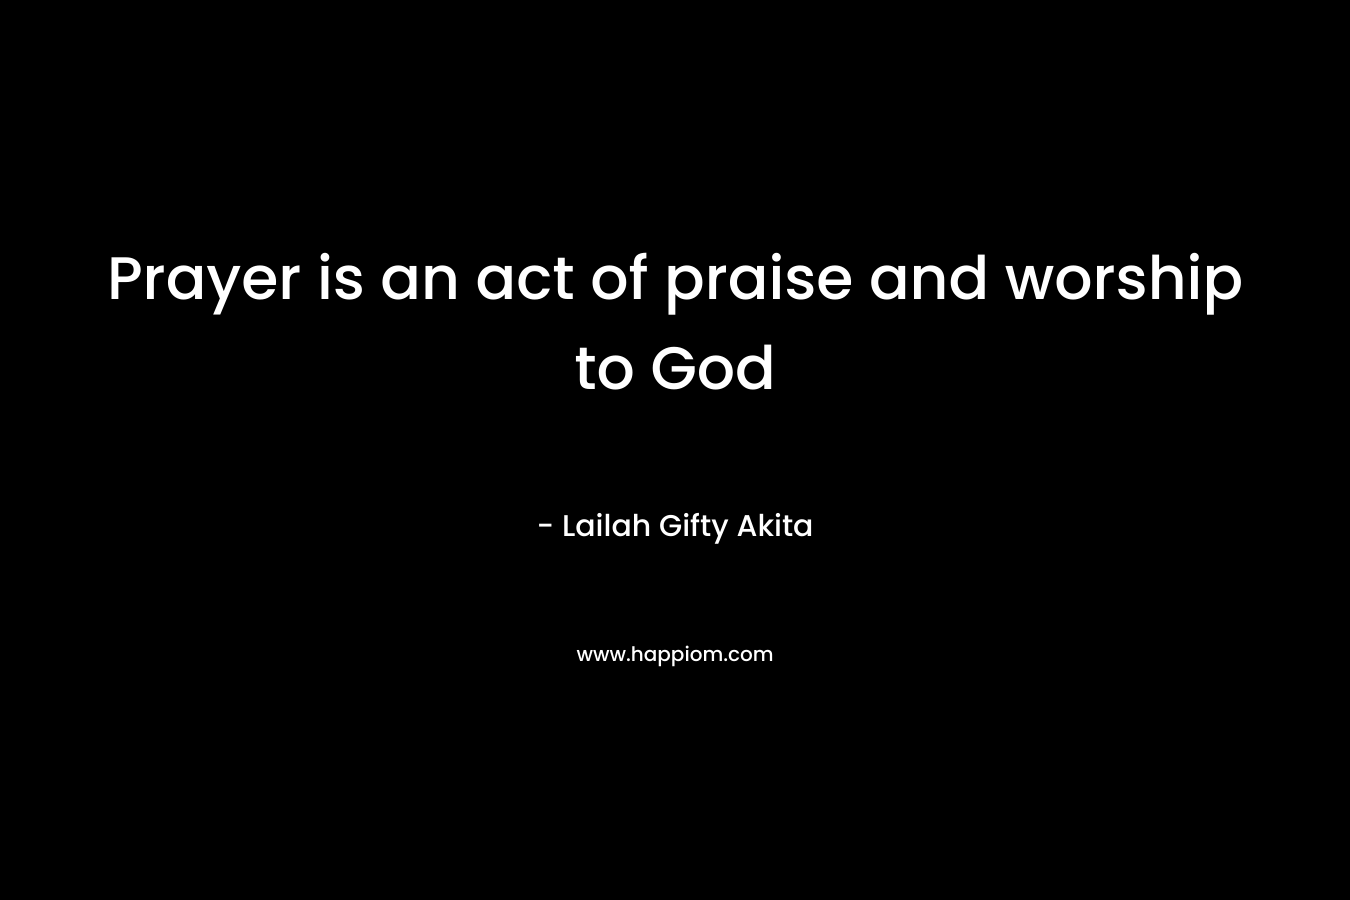 Prayer is an act of praise and worship to God